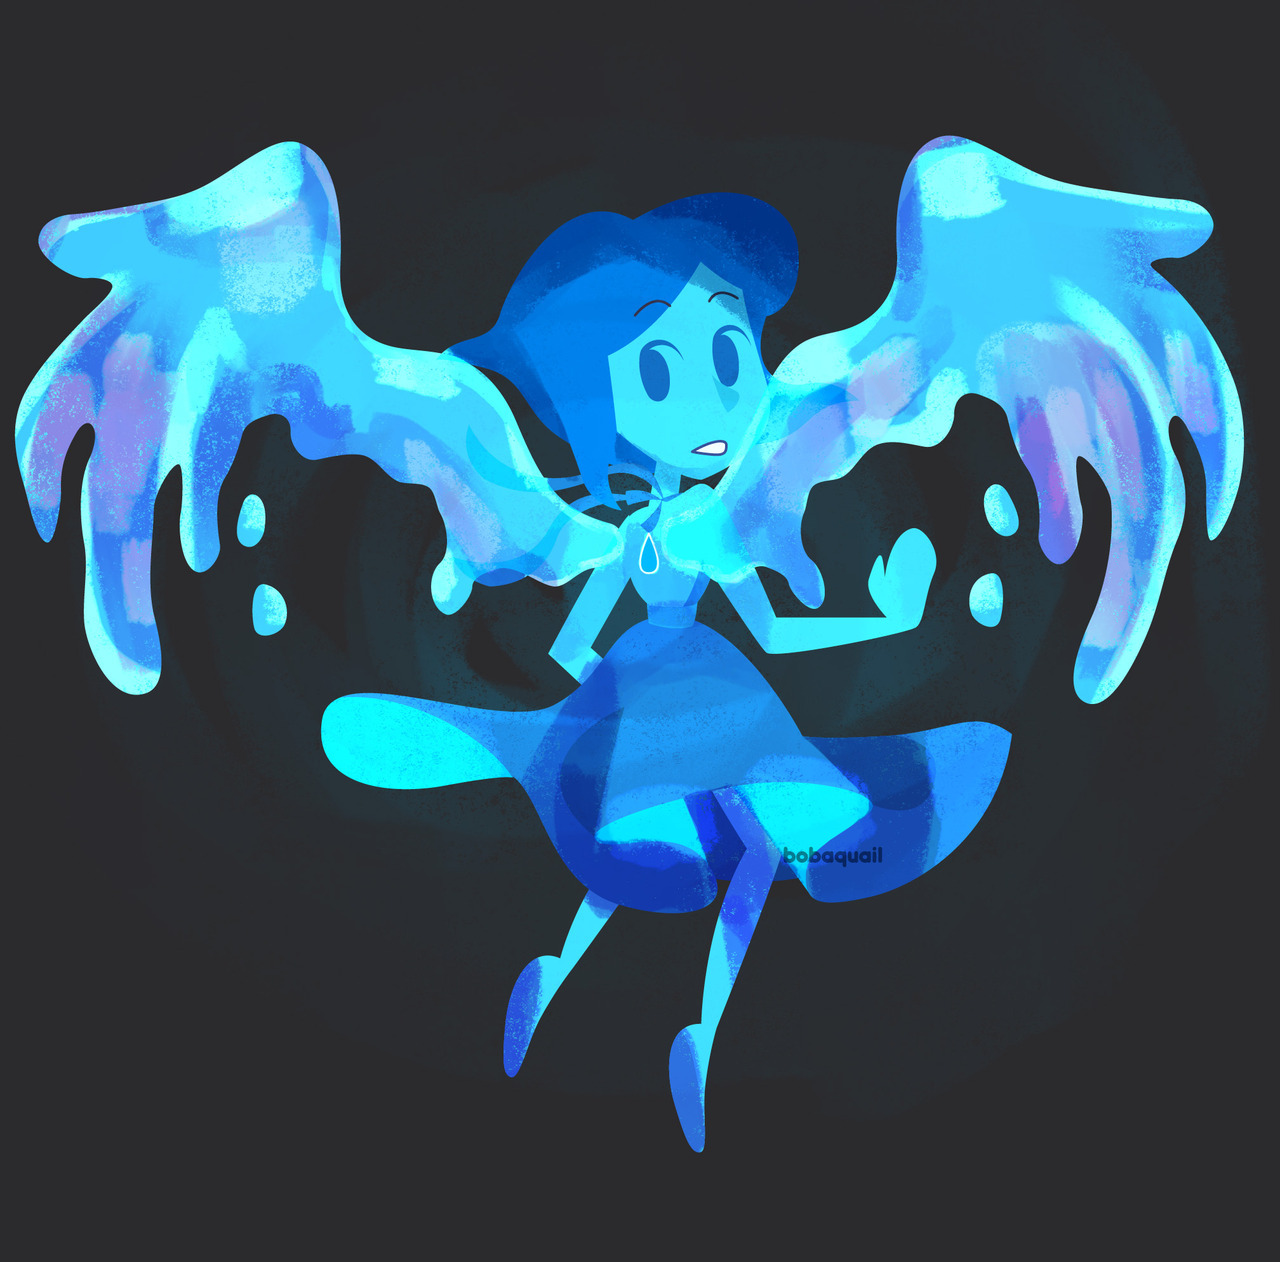 One of the assets used in the Lapis Save the Light animation! 💙